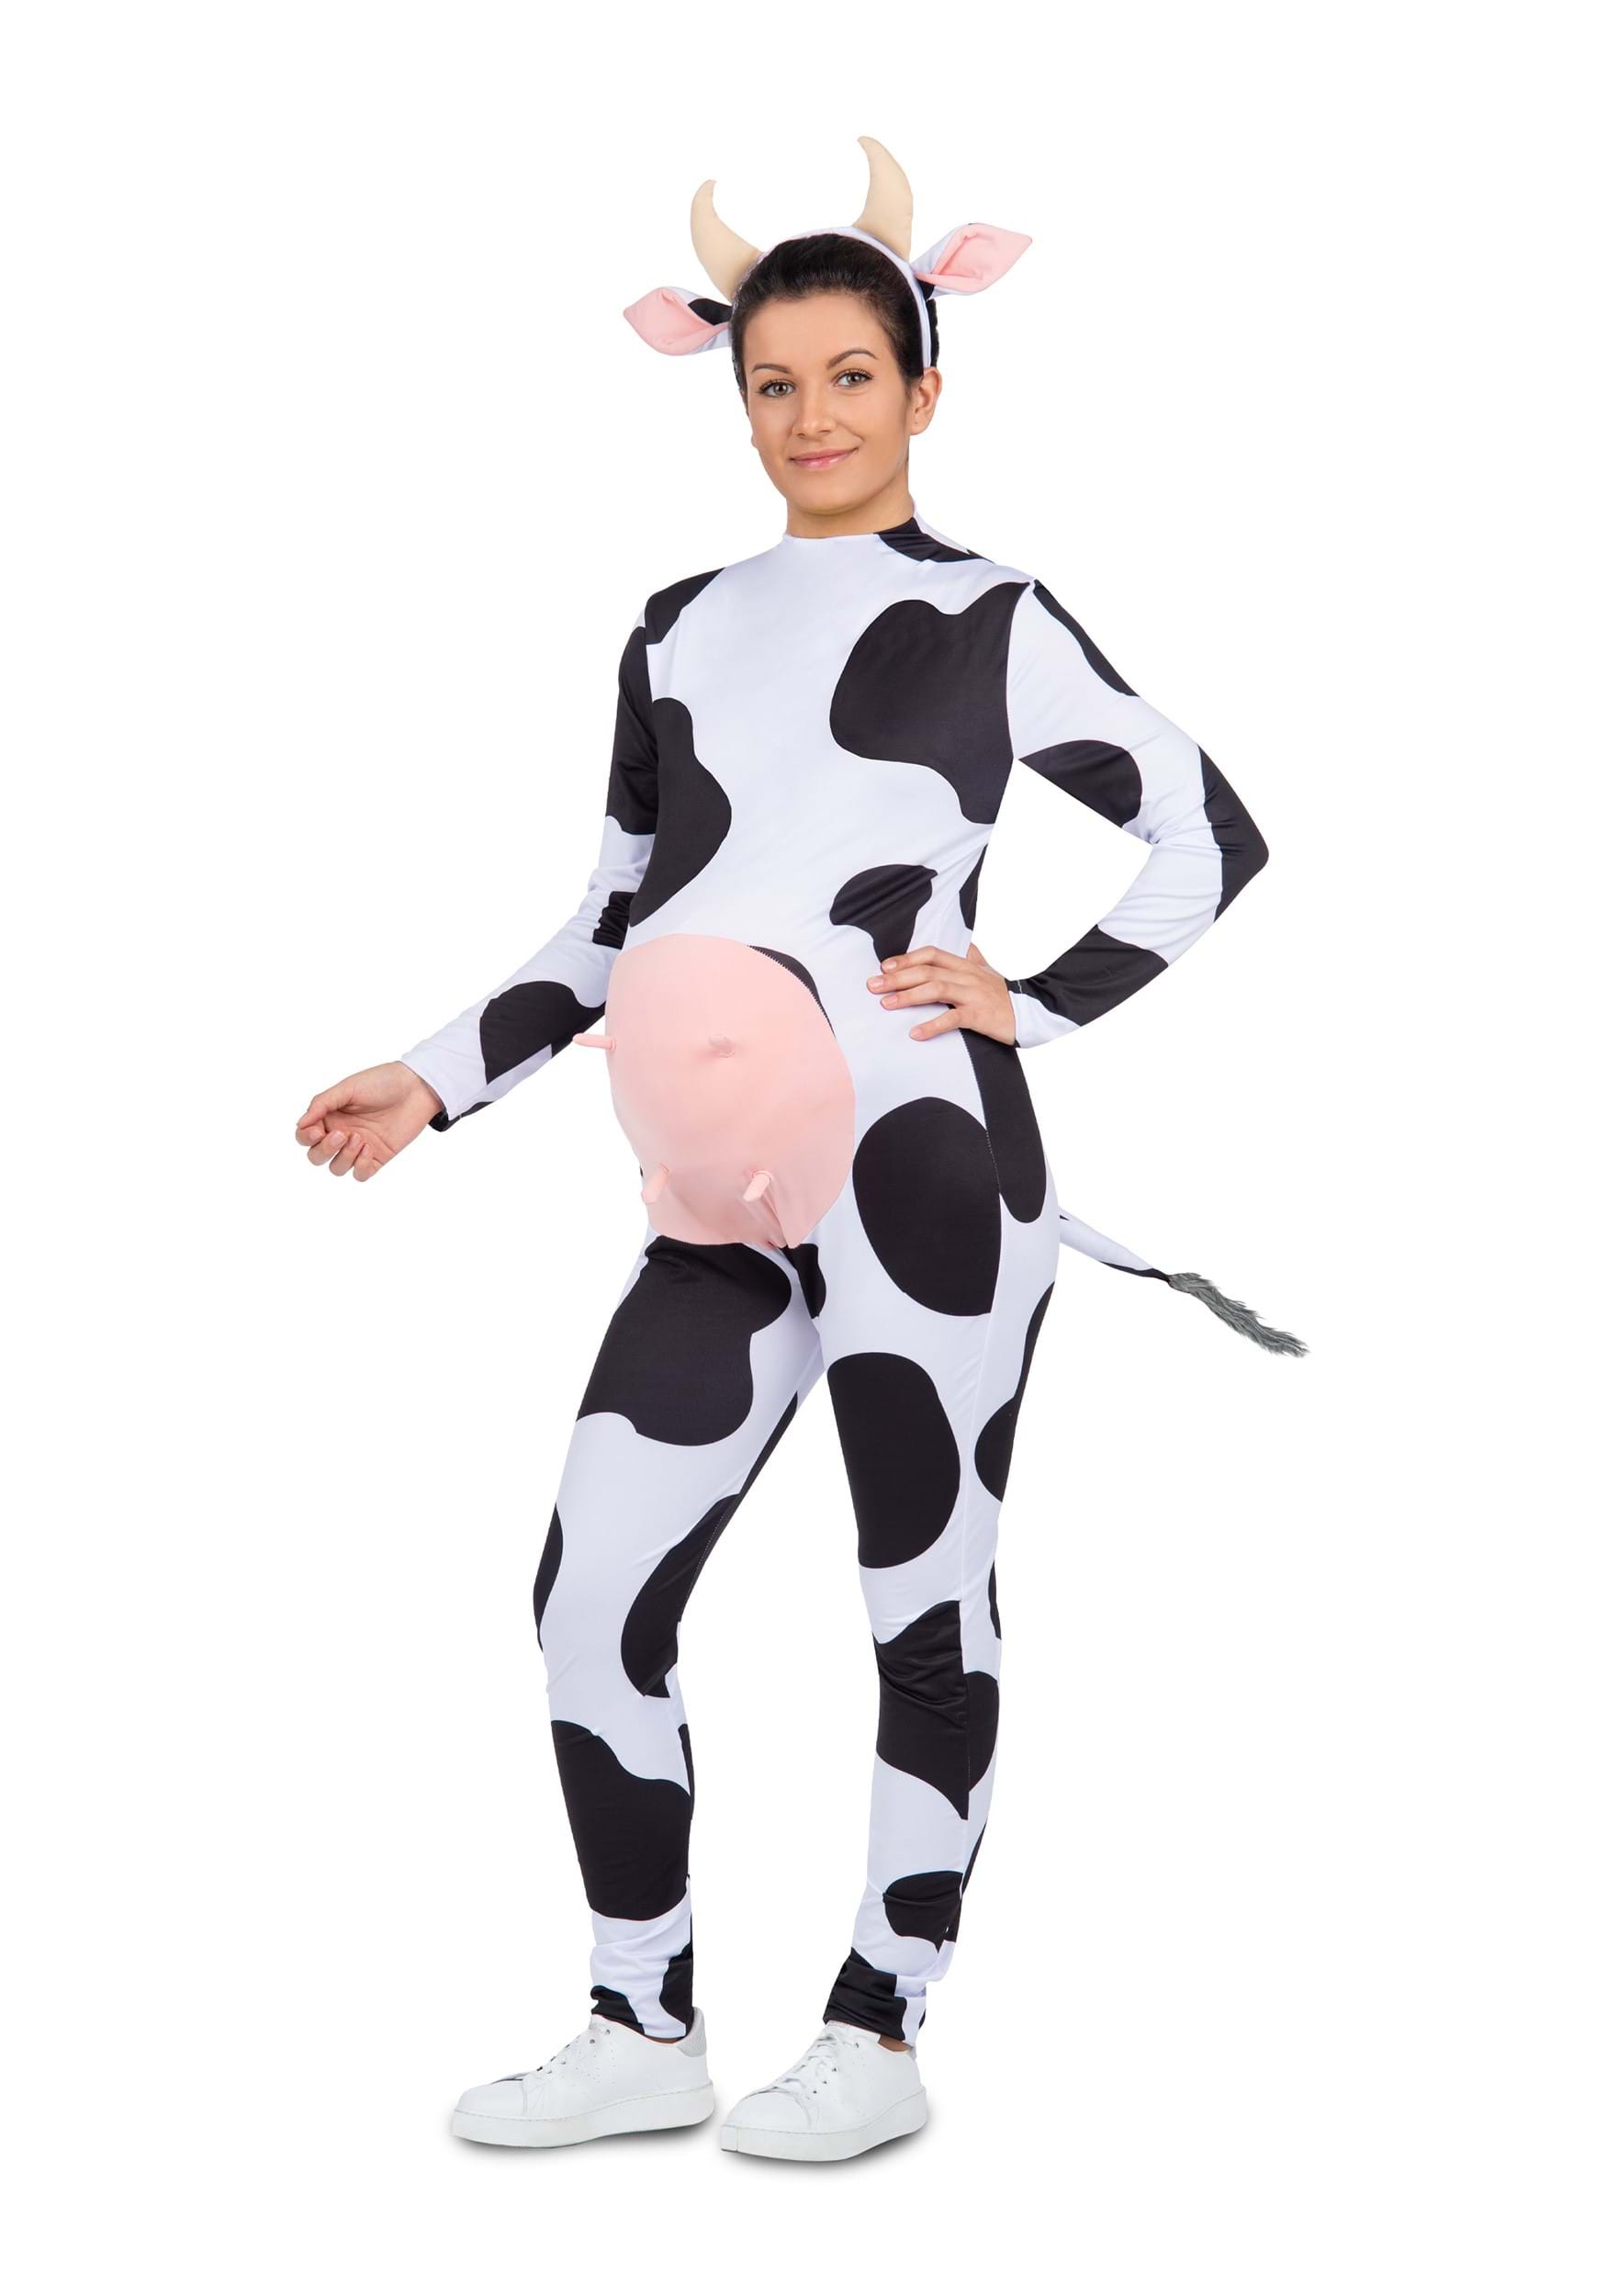 https://images.halloweencostumes.ca/products/83454/1-1/womens-maternity-cow-costume.jpg